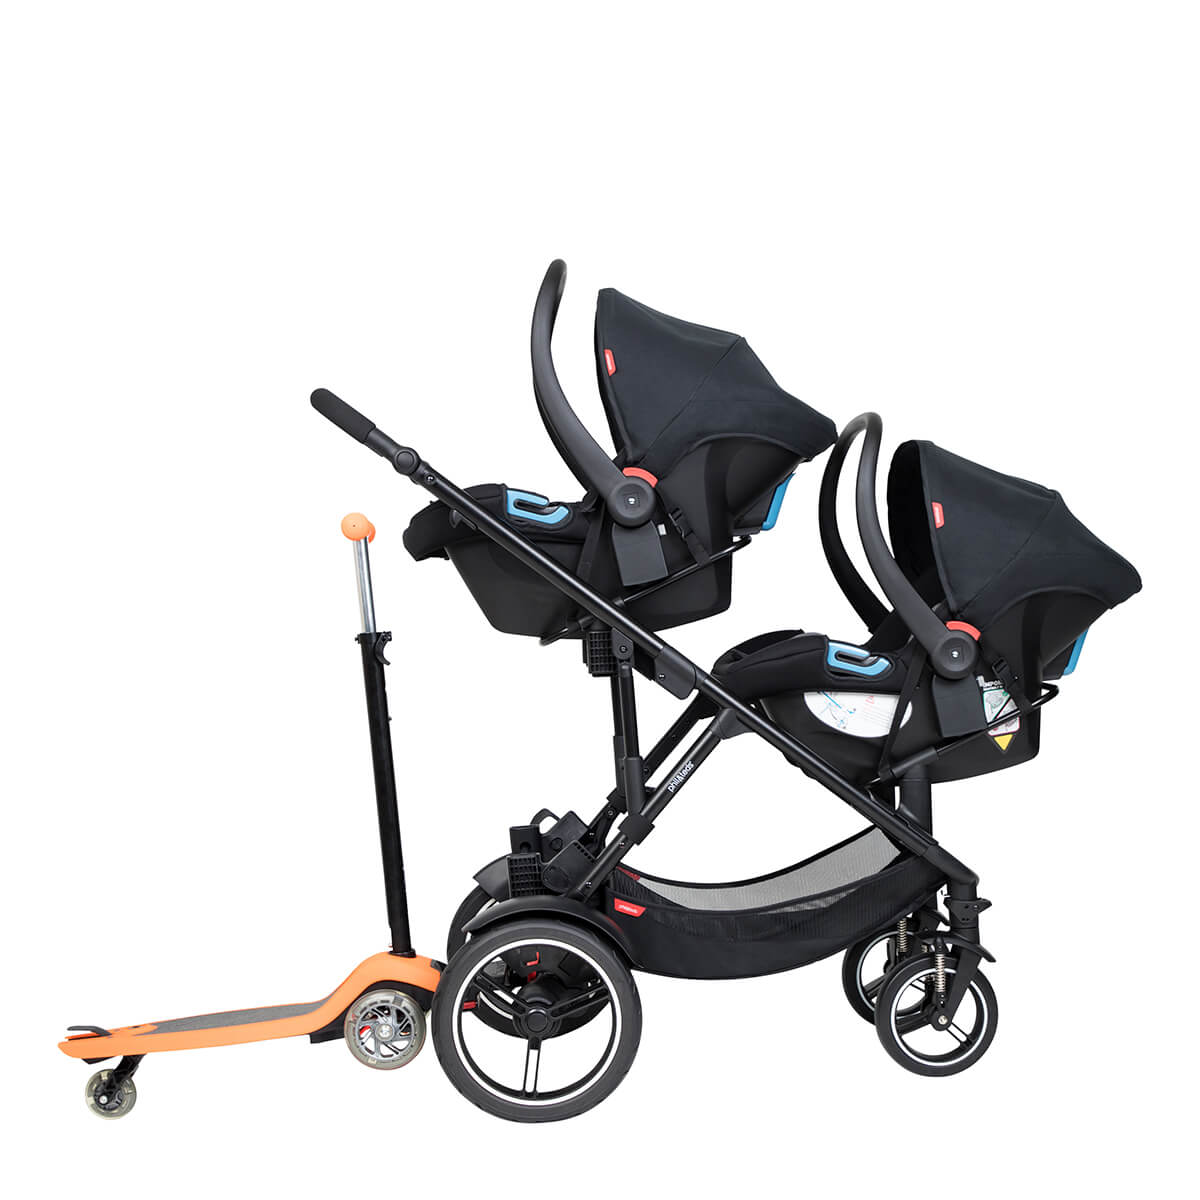 https://cdn.accentuate.io/7671711465650/19438665367730/philteds-voyager-buggy-with-double-travel-systems-and-freerider-stroller-board-in-the-rear-v1682480115852.jpg?1200x1200